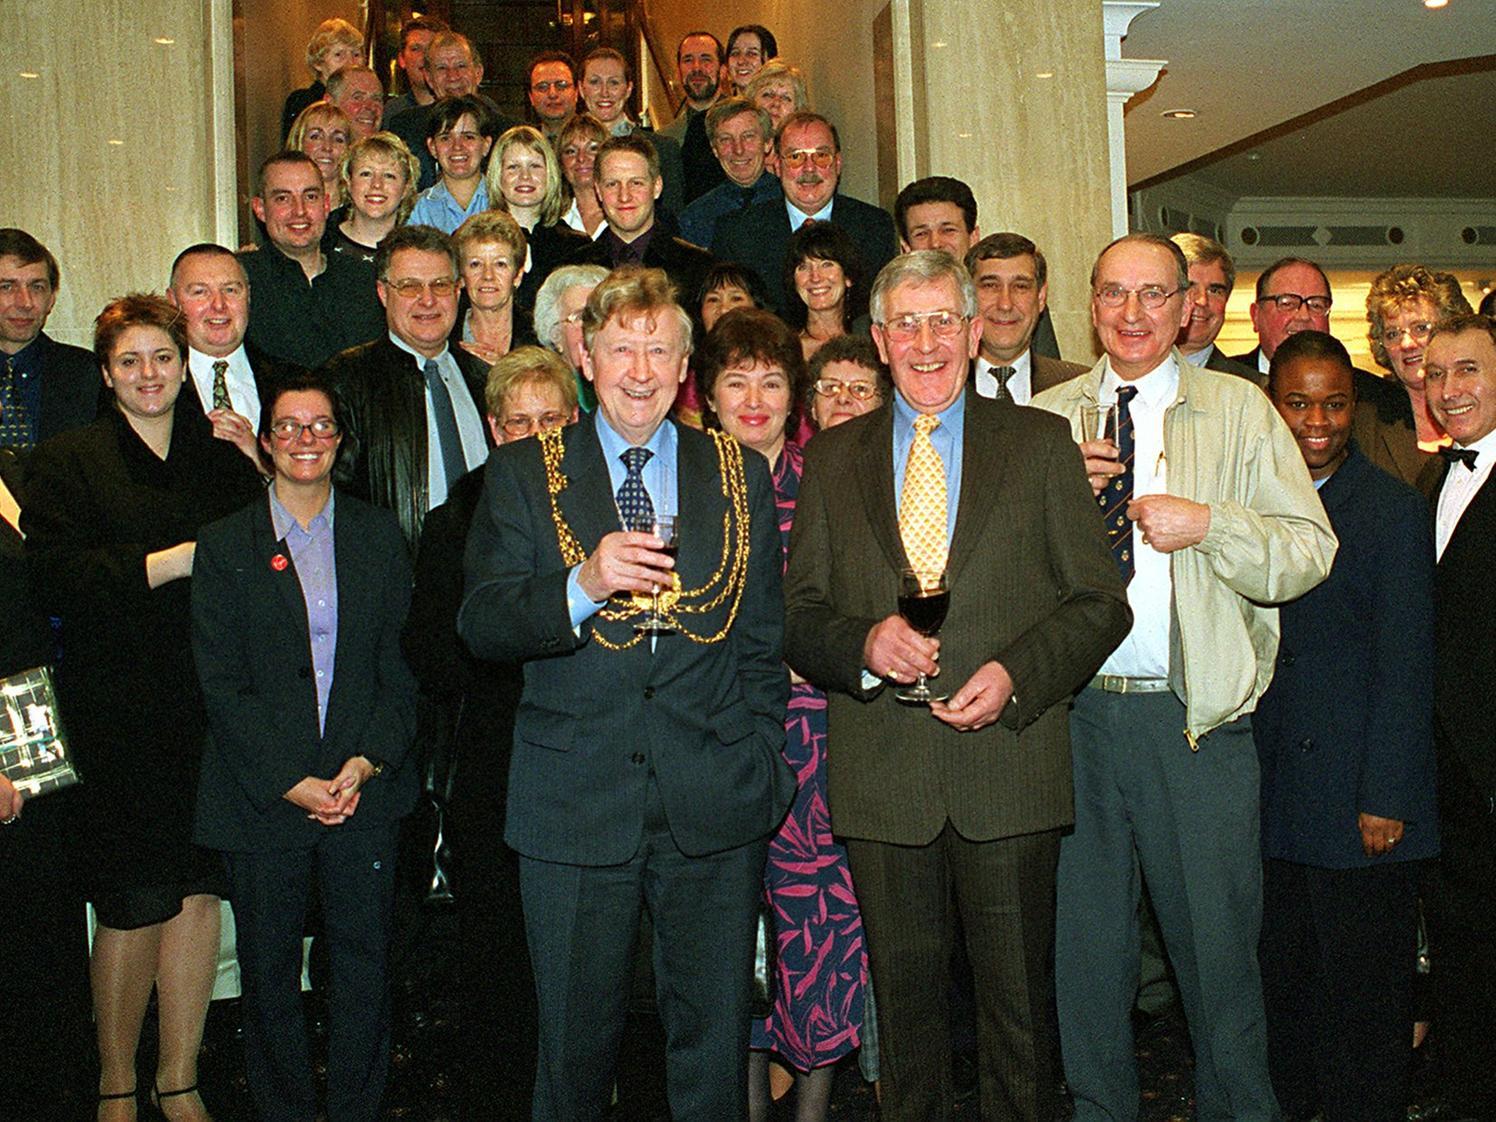 January 2001 and The Lord Mayor of Leeds, Councillor Bernard Atha, toasts Brian Clegg, centre, who was retiring from the Queens Hotel.